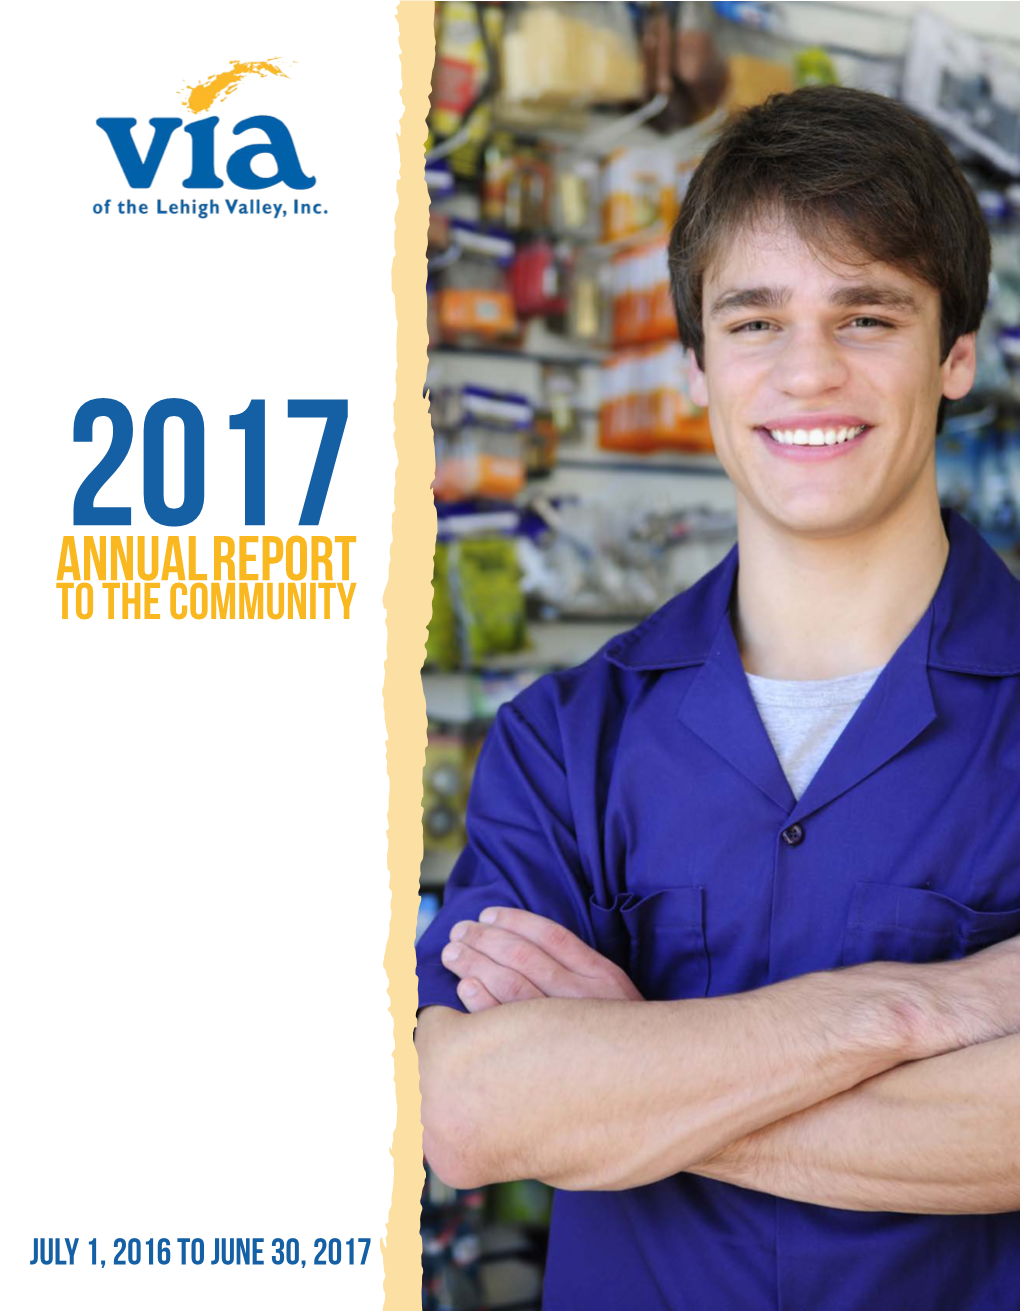 2017 Annual Report to the Community